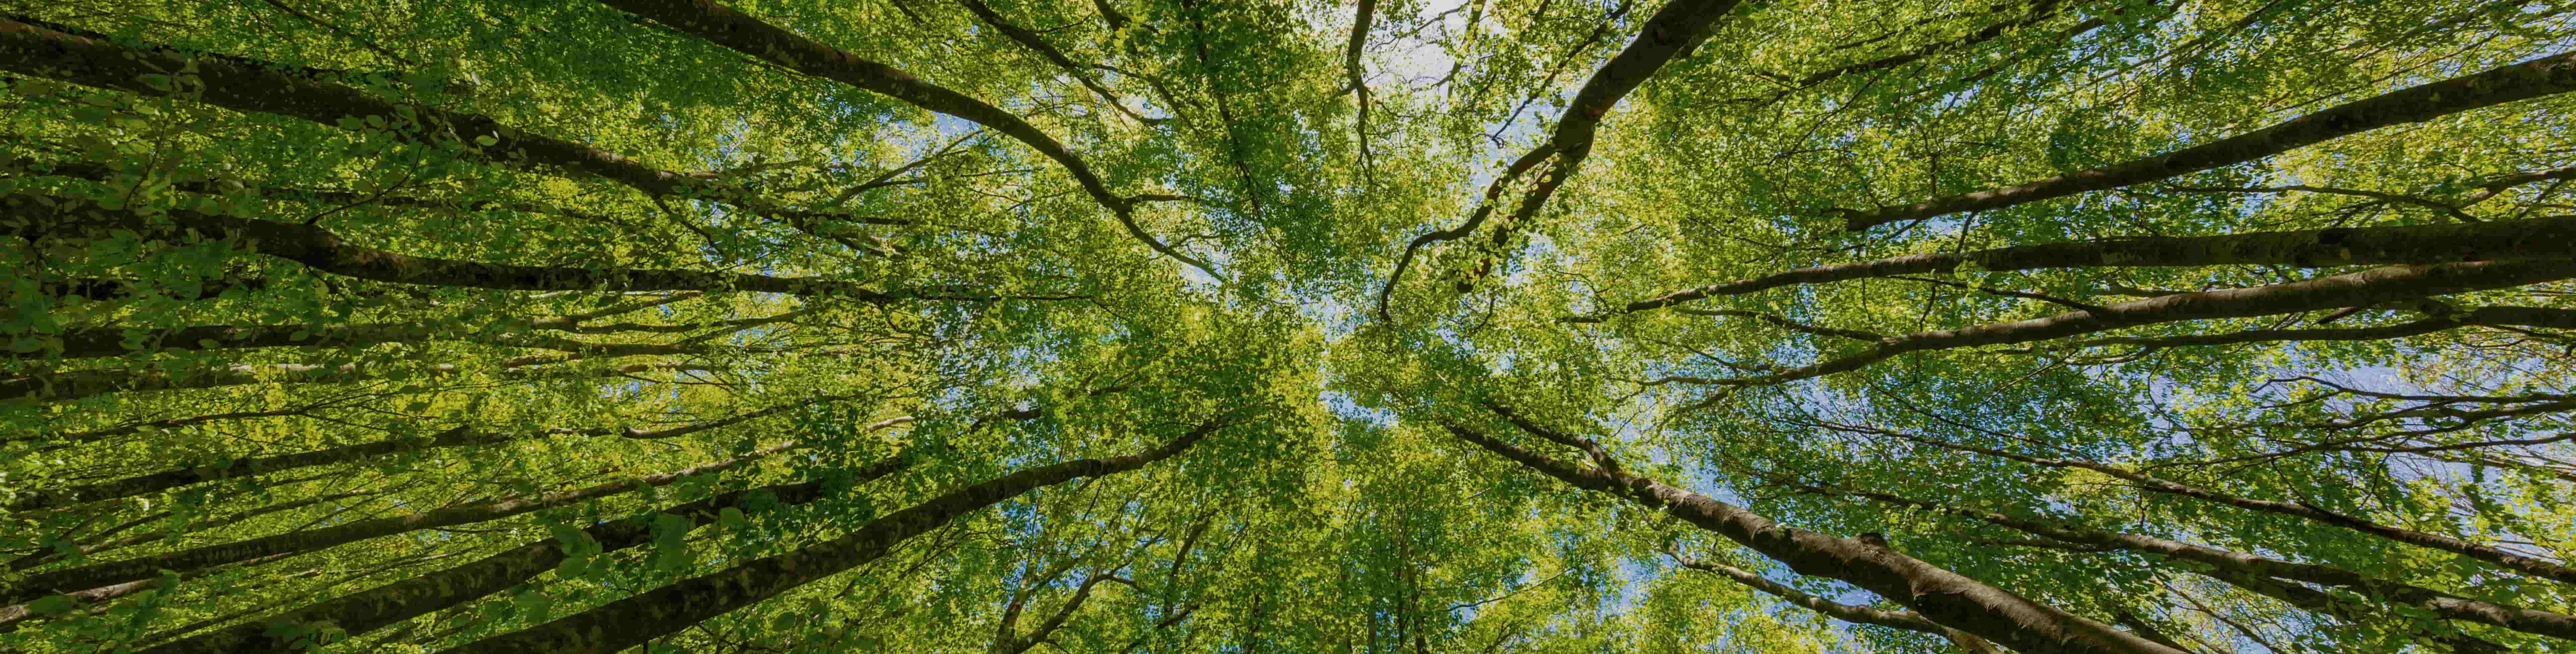 The image is of trees in a forest, viewing from the ground up.